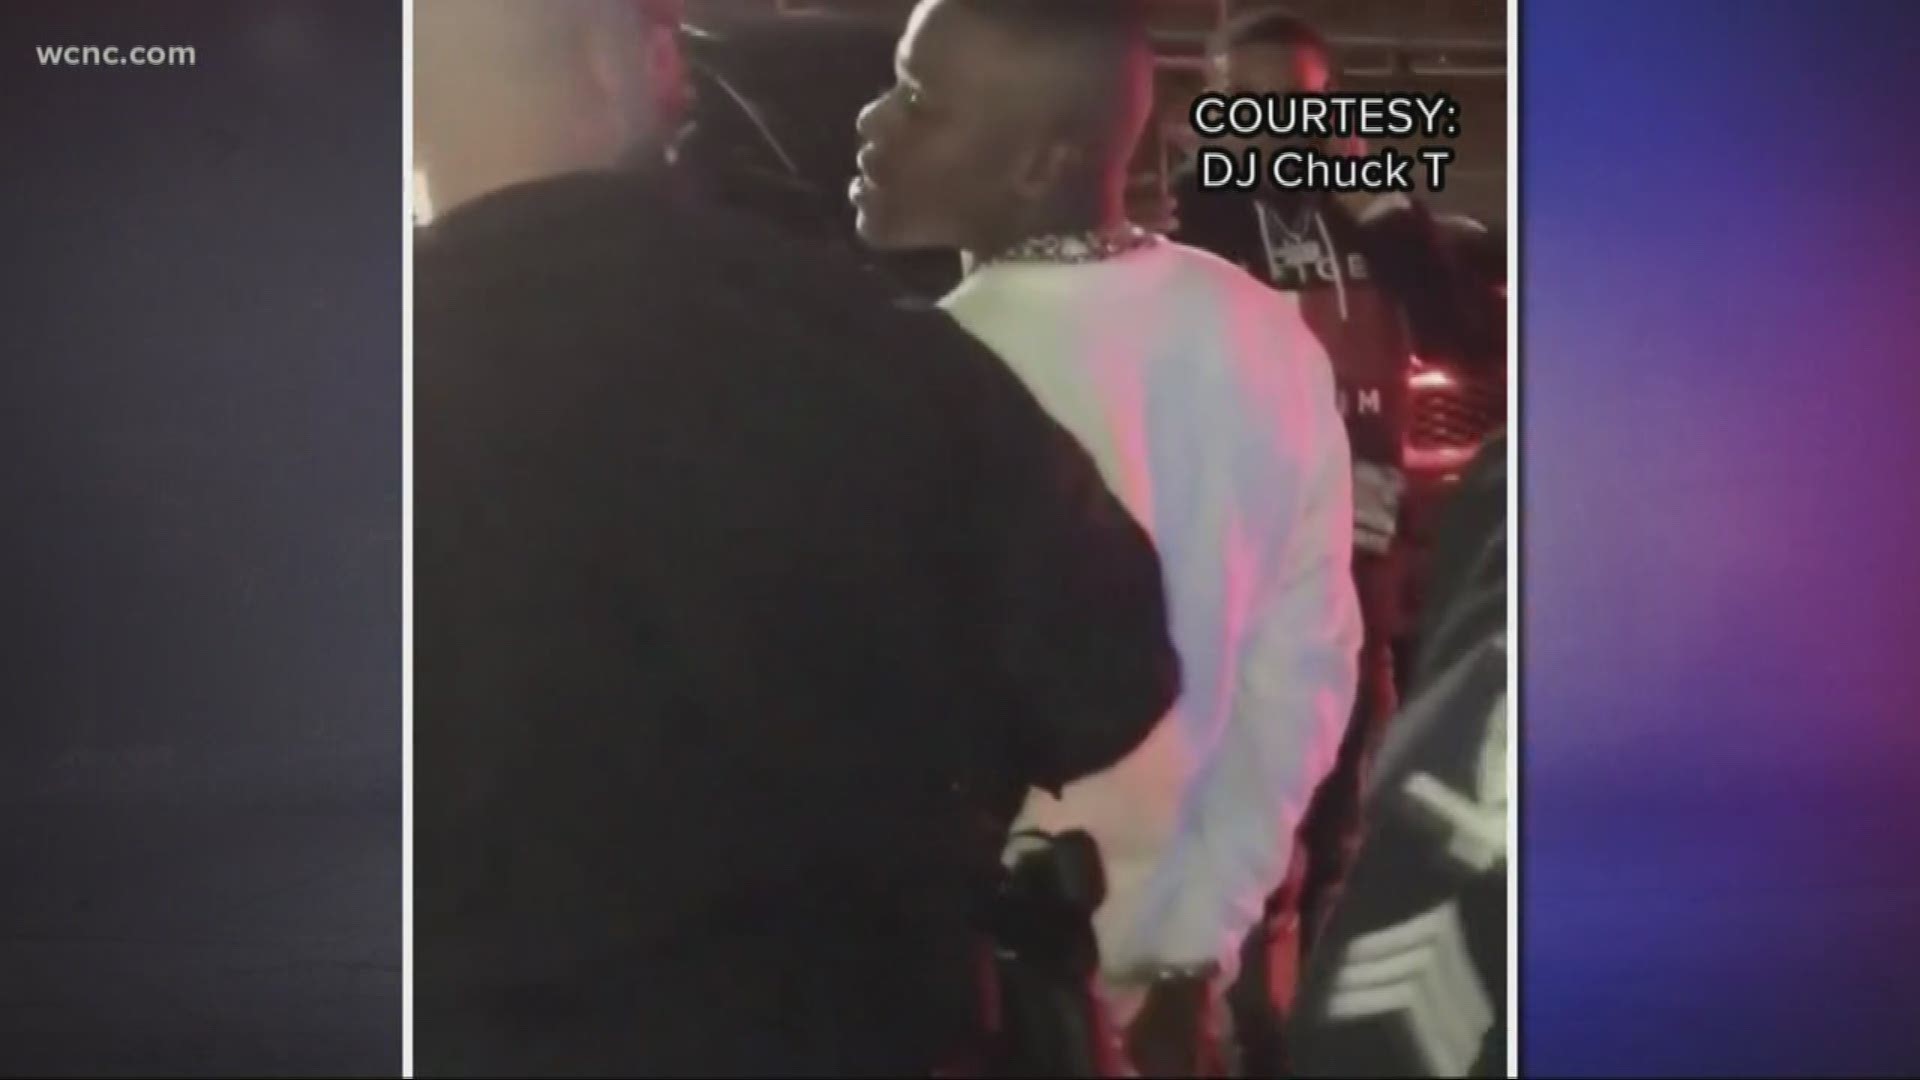 Rapper is threatening to release recordings of his police encounter. The police department has launched an internal investigation into the incident.